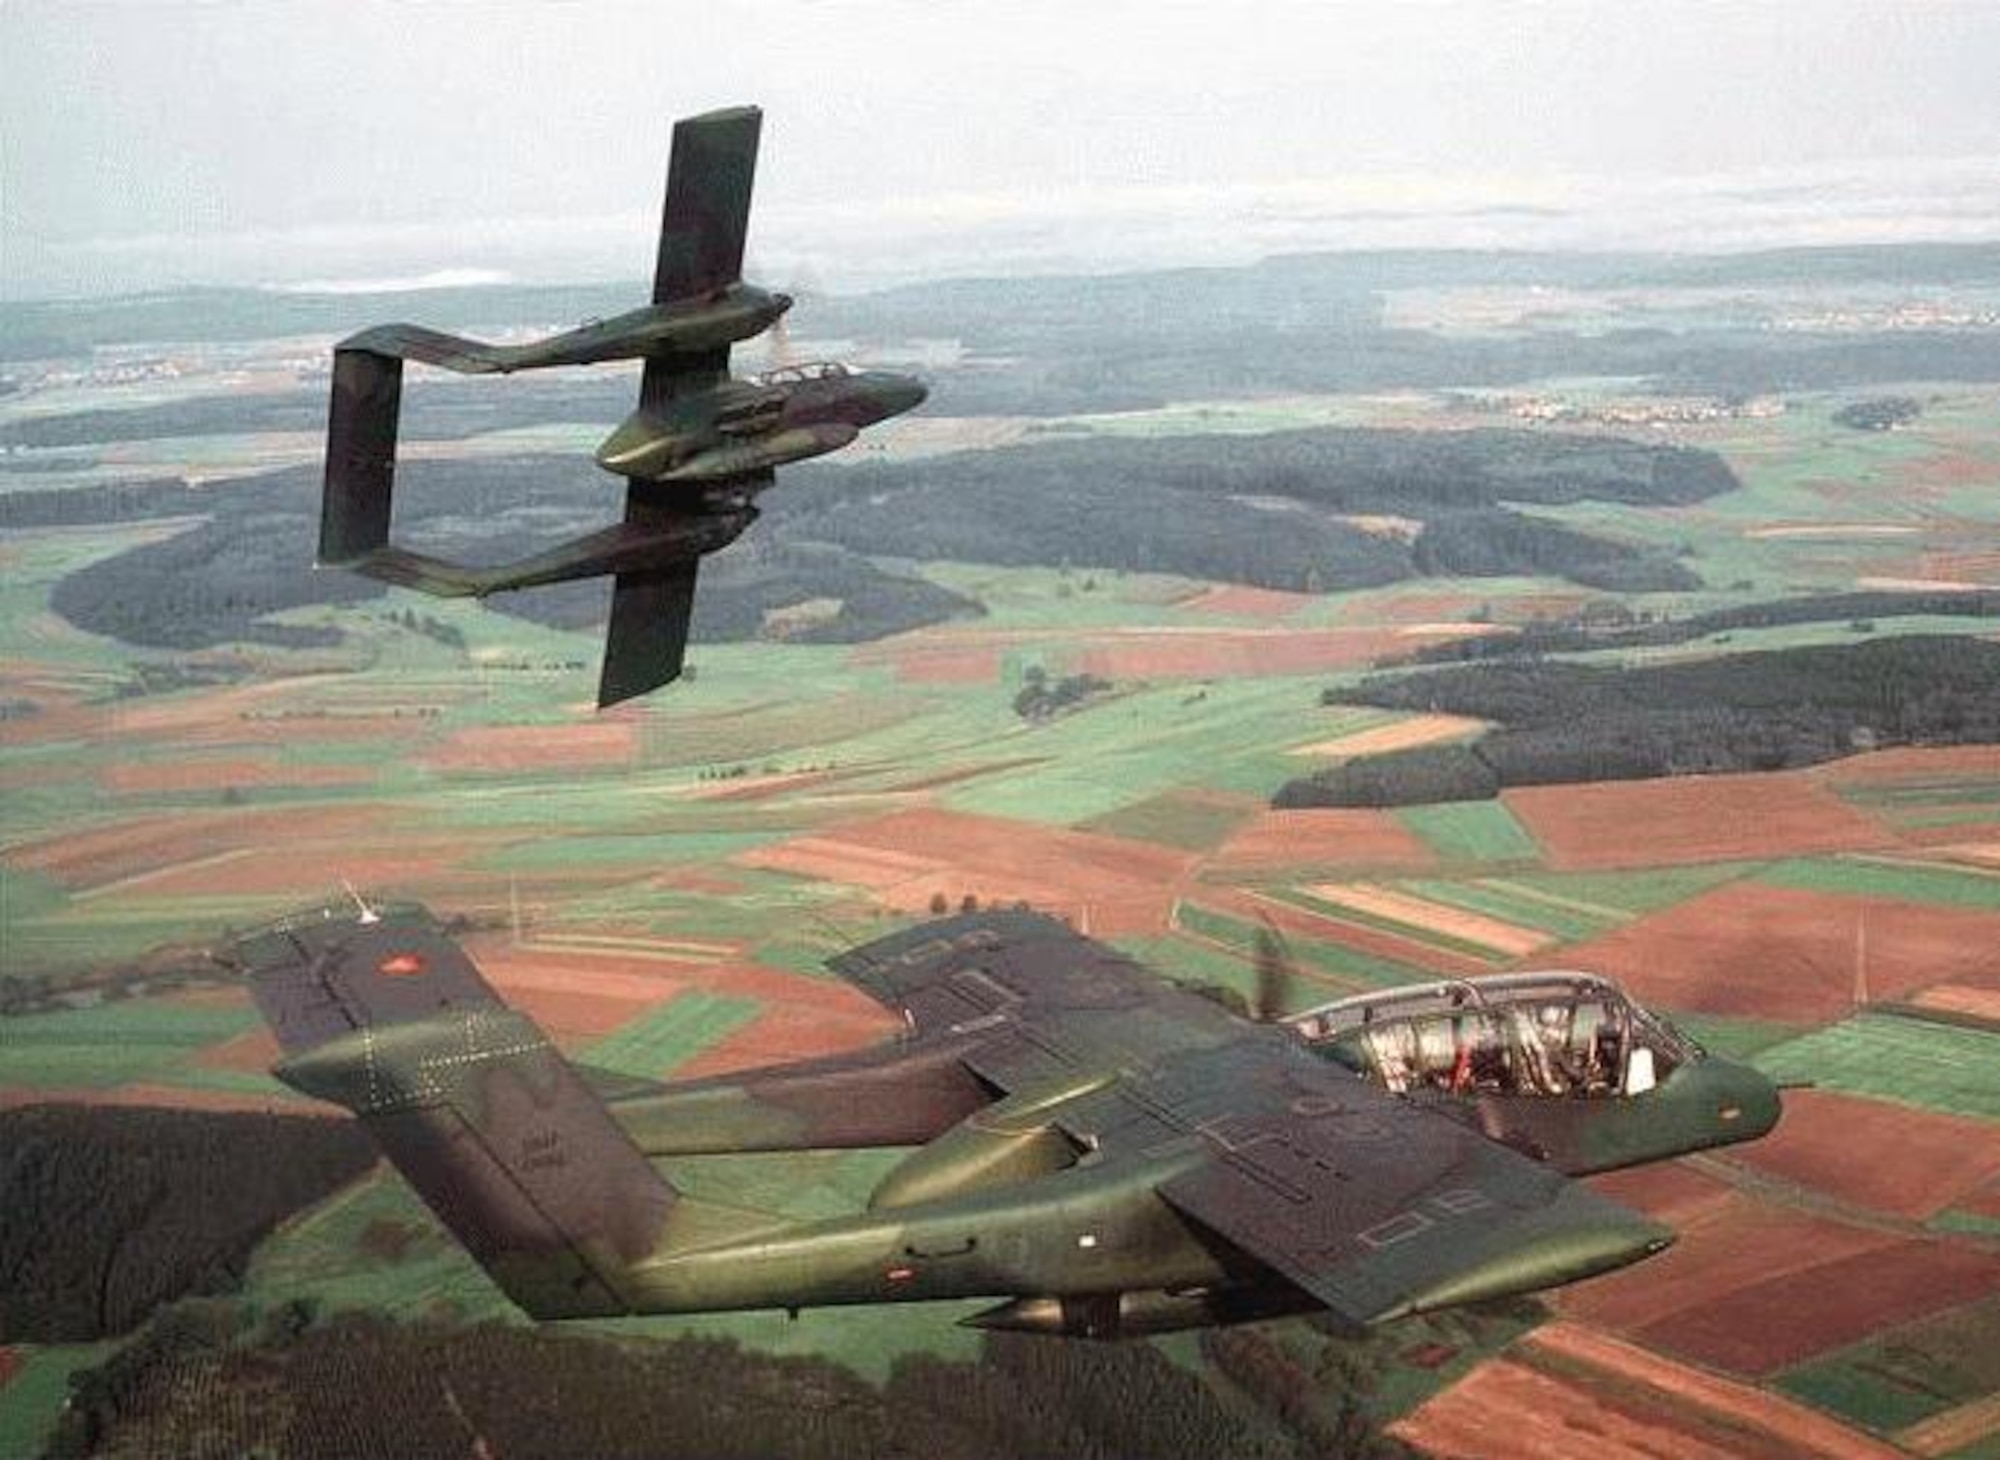 As part of its Air Bridge Denial Program, the Colombian Air Force has several U.S.-provided OV-10 Bronco aircraft it uses to force or shoot down illegal flights that are either entering or exiting the country. (Air Force photo)